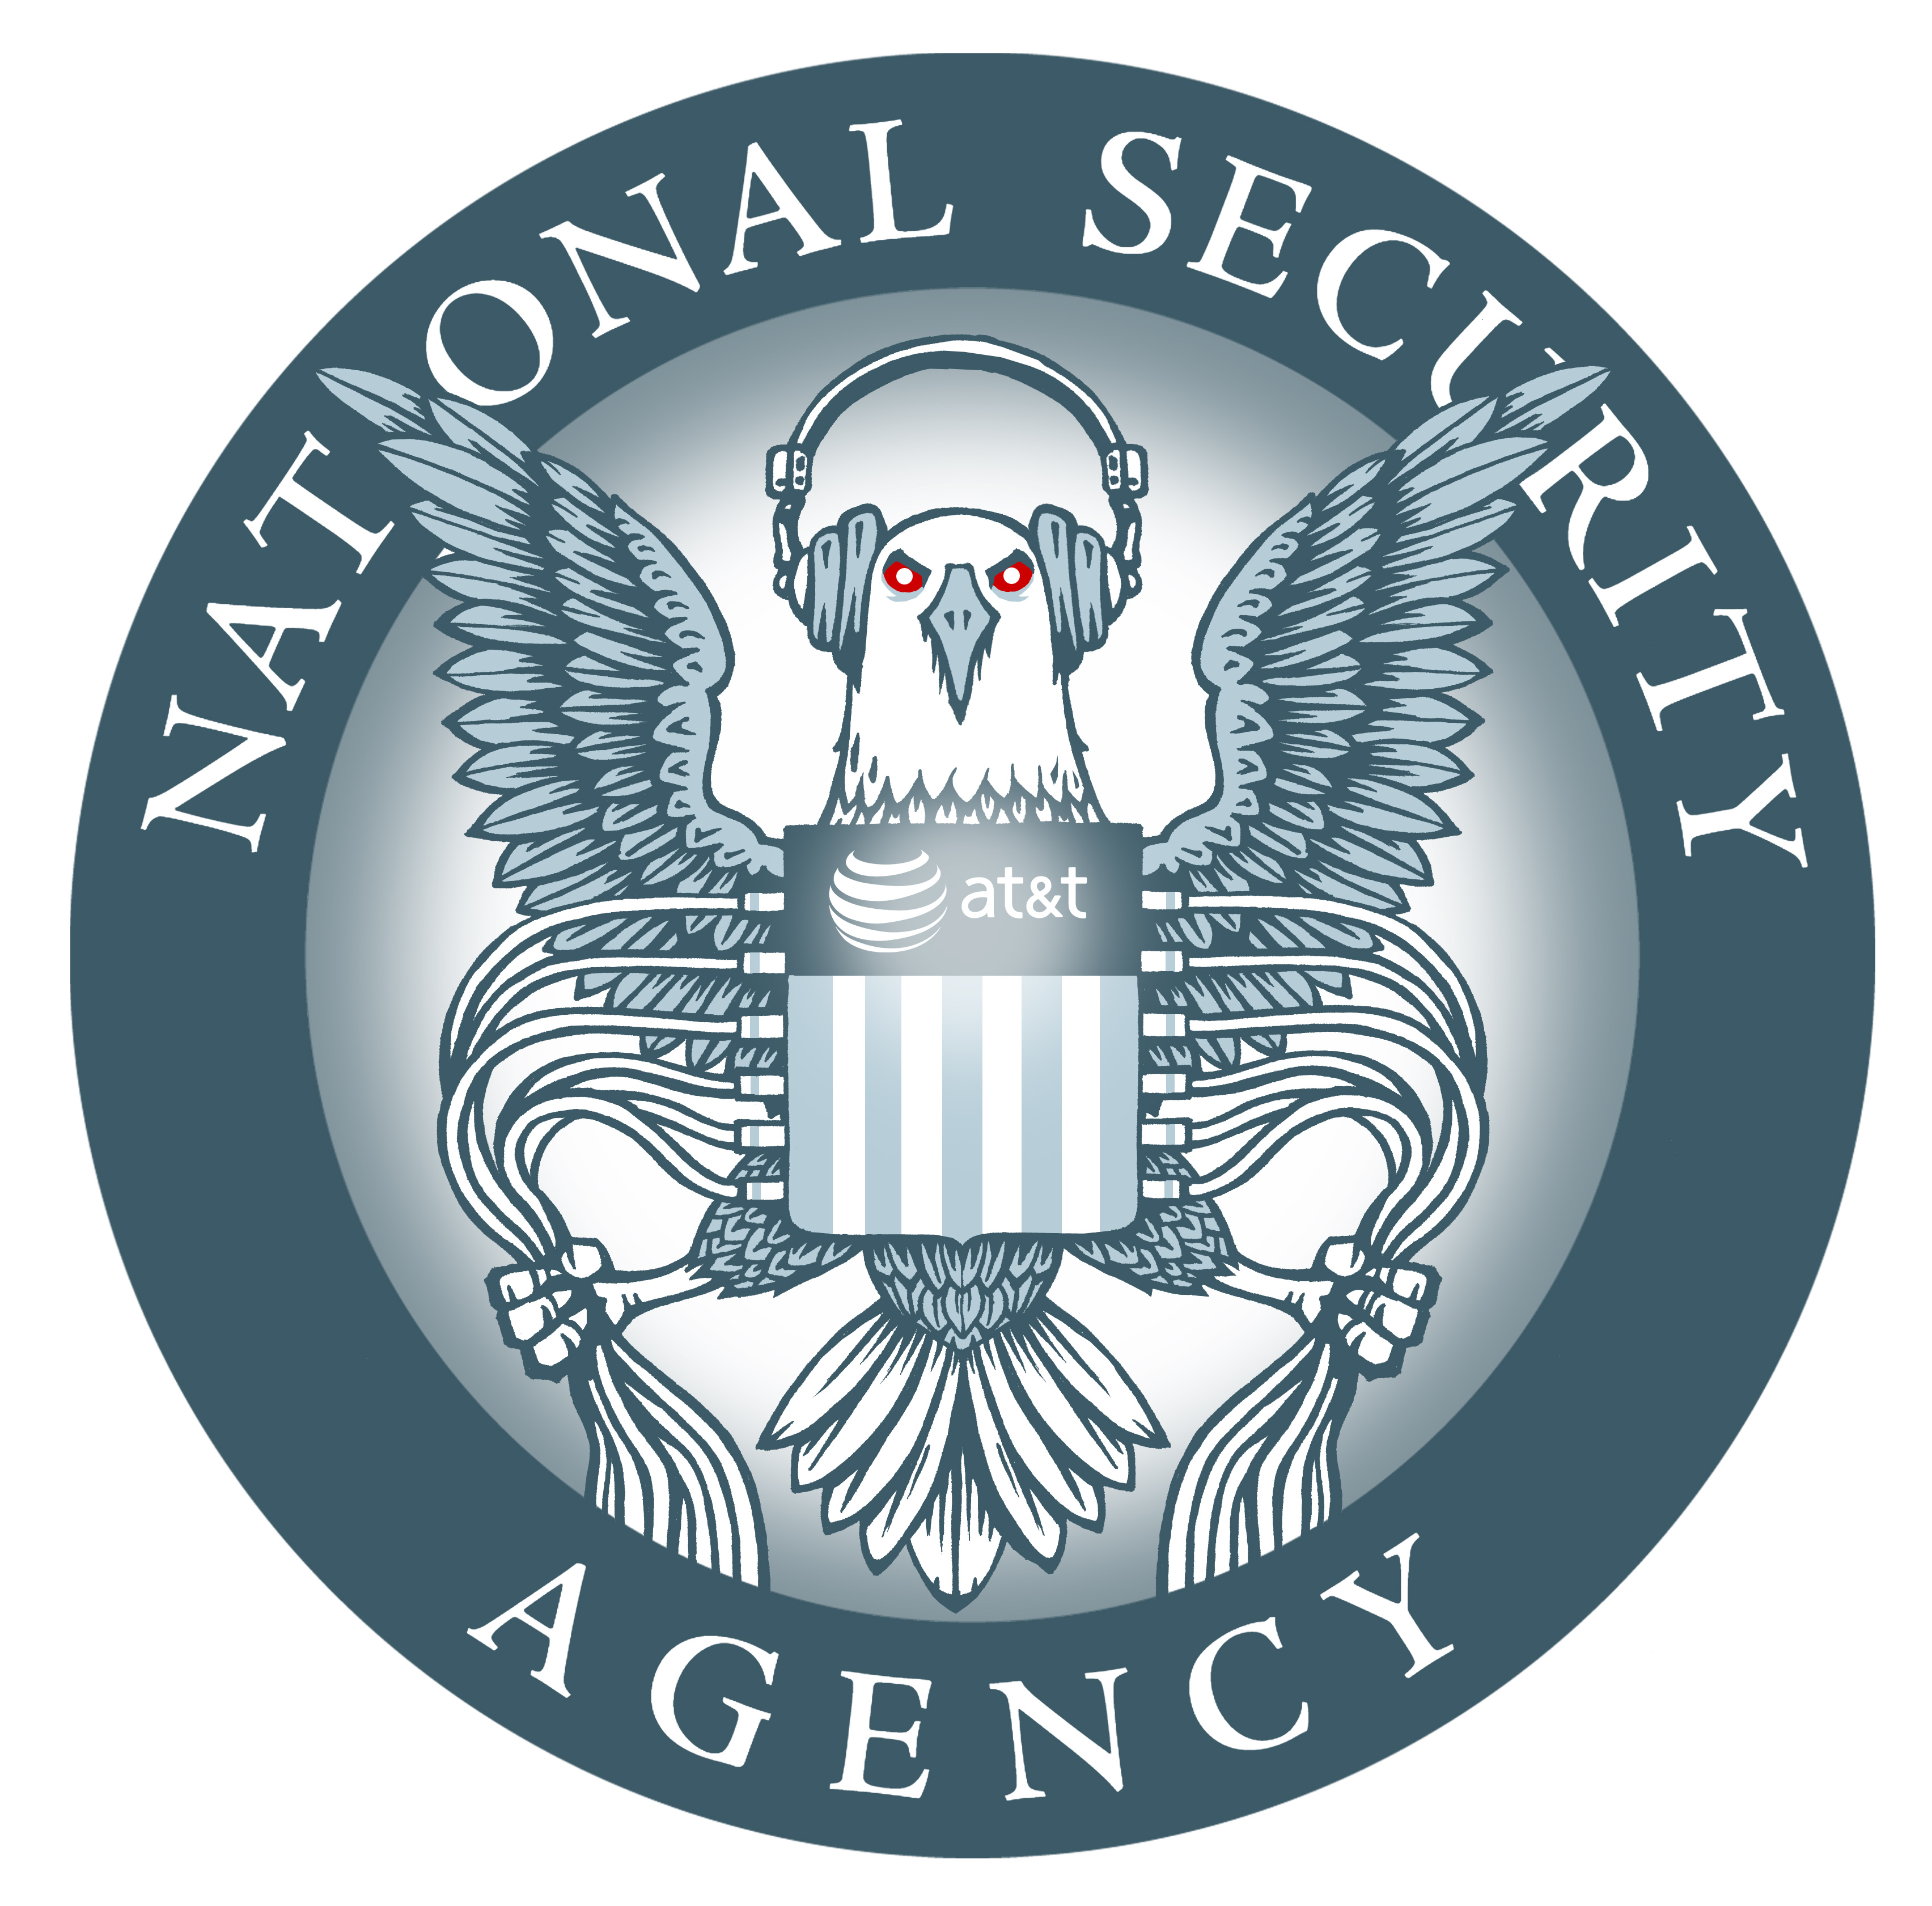 Geek insider, geekinsider, geekinsider. Com,, nsa and your phone calls: the finest of ironies, news